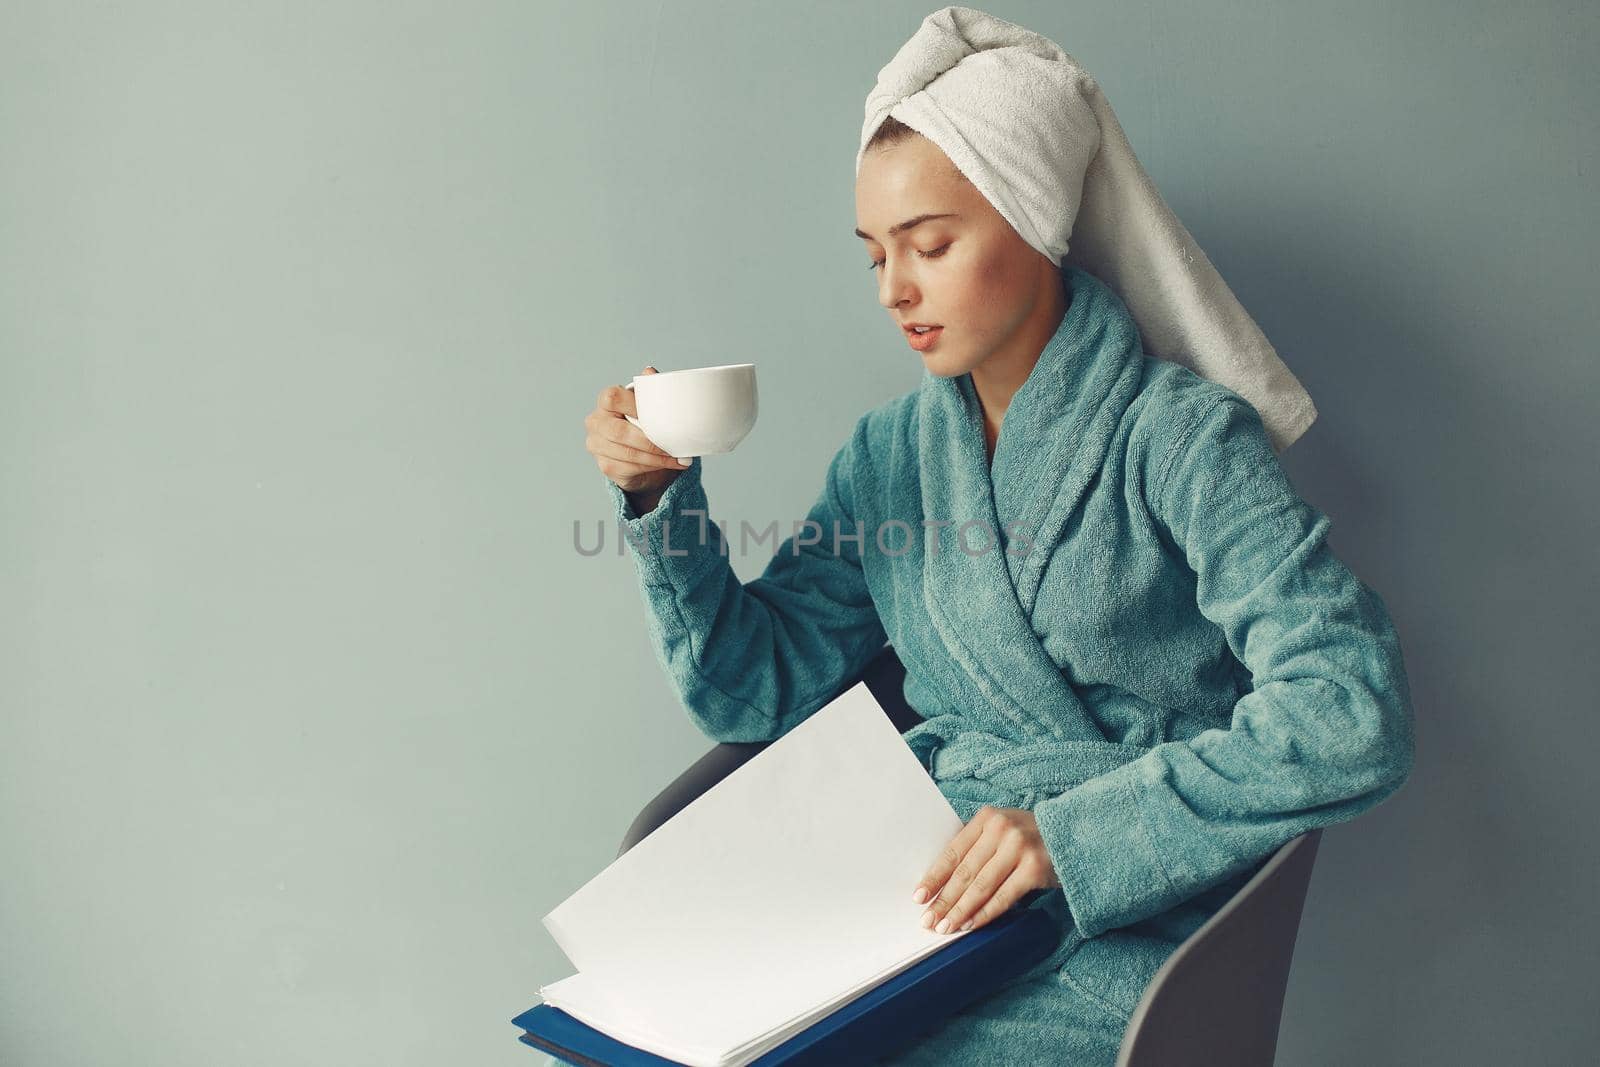 Girl in a studio. Lady in a blue bathrobe. Woman with a documents